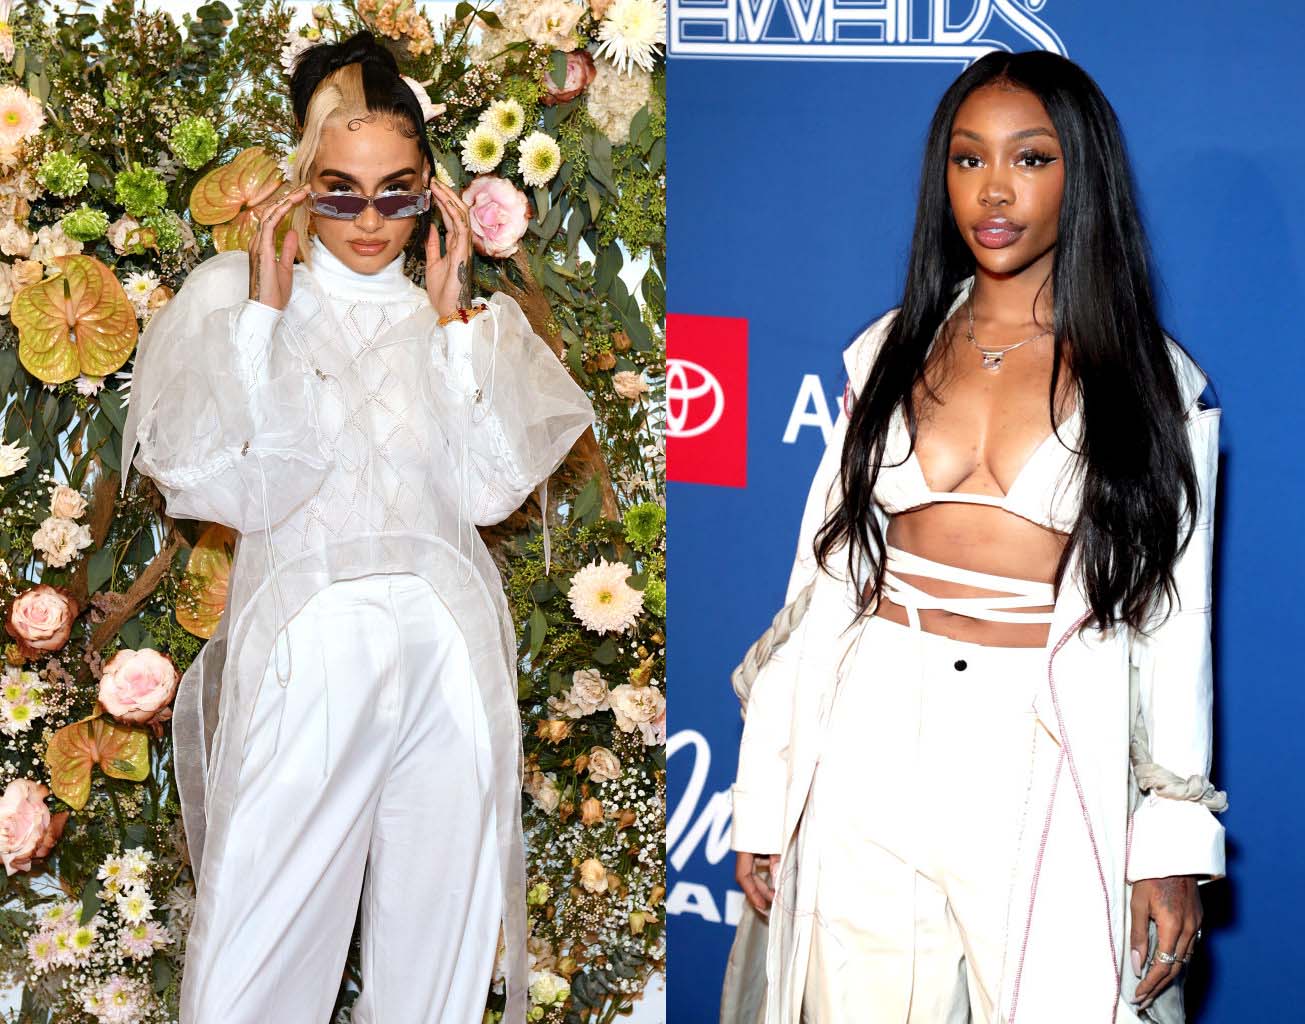 Kehlani And SZA Video Visiting Rihanna's After Party Gone Viral Days After MET Gala - And Here's Why Fans Love It!